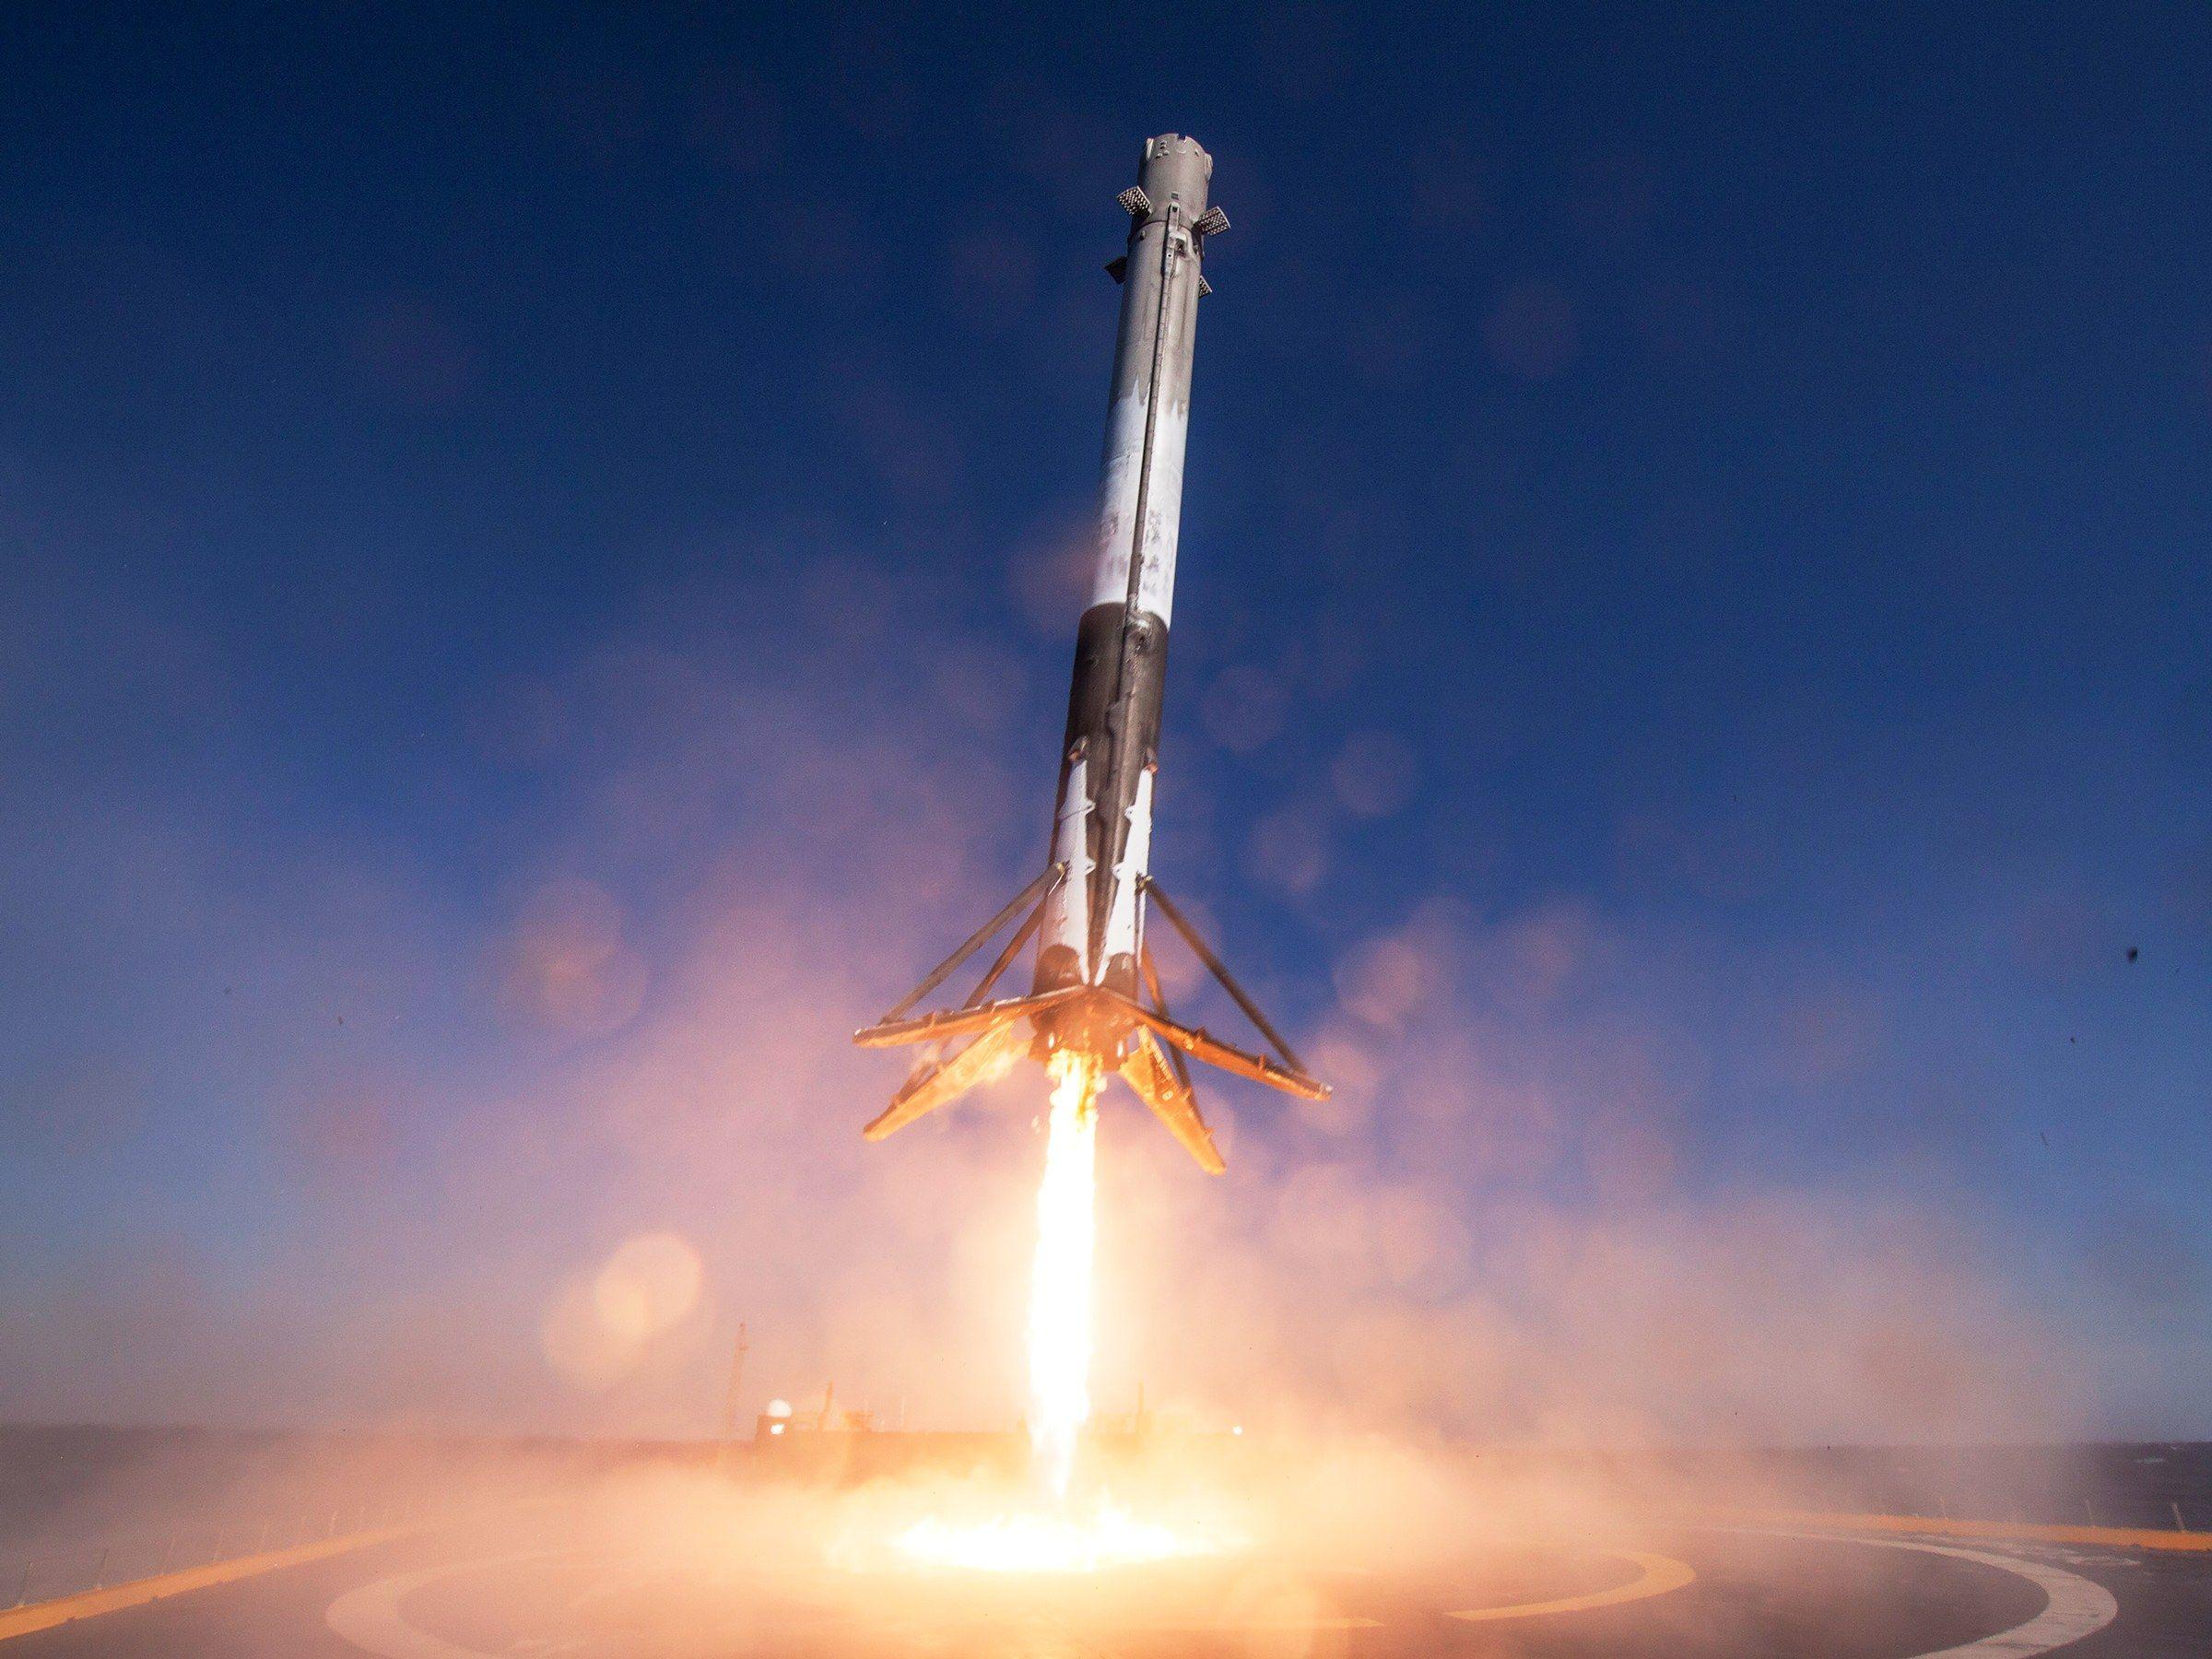 Iridium-1 Mission SpaceX Logo - Watch SpaceX Fire Off Its Second Flight Proven Falcon 9